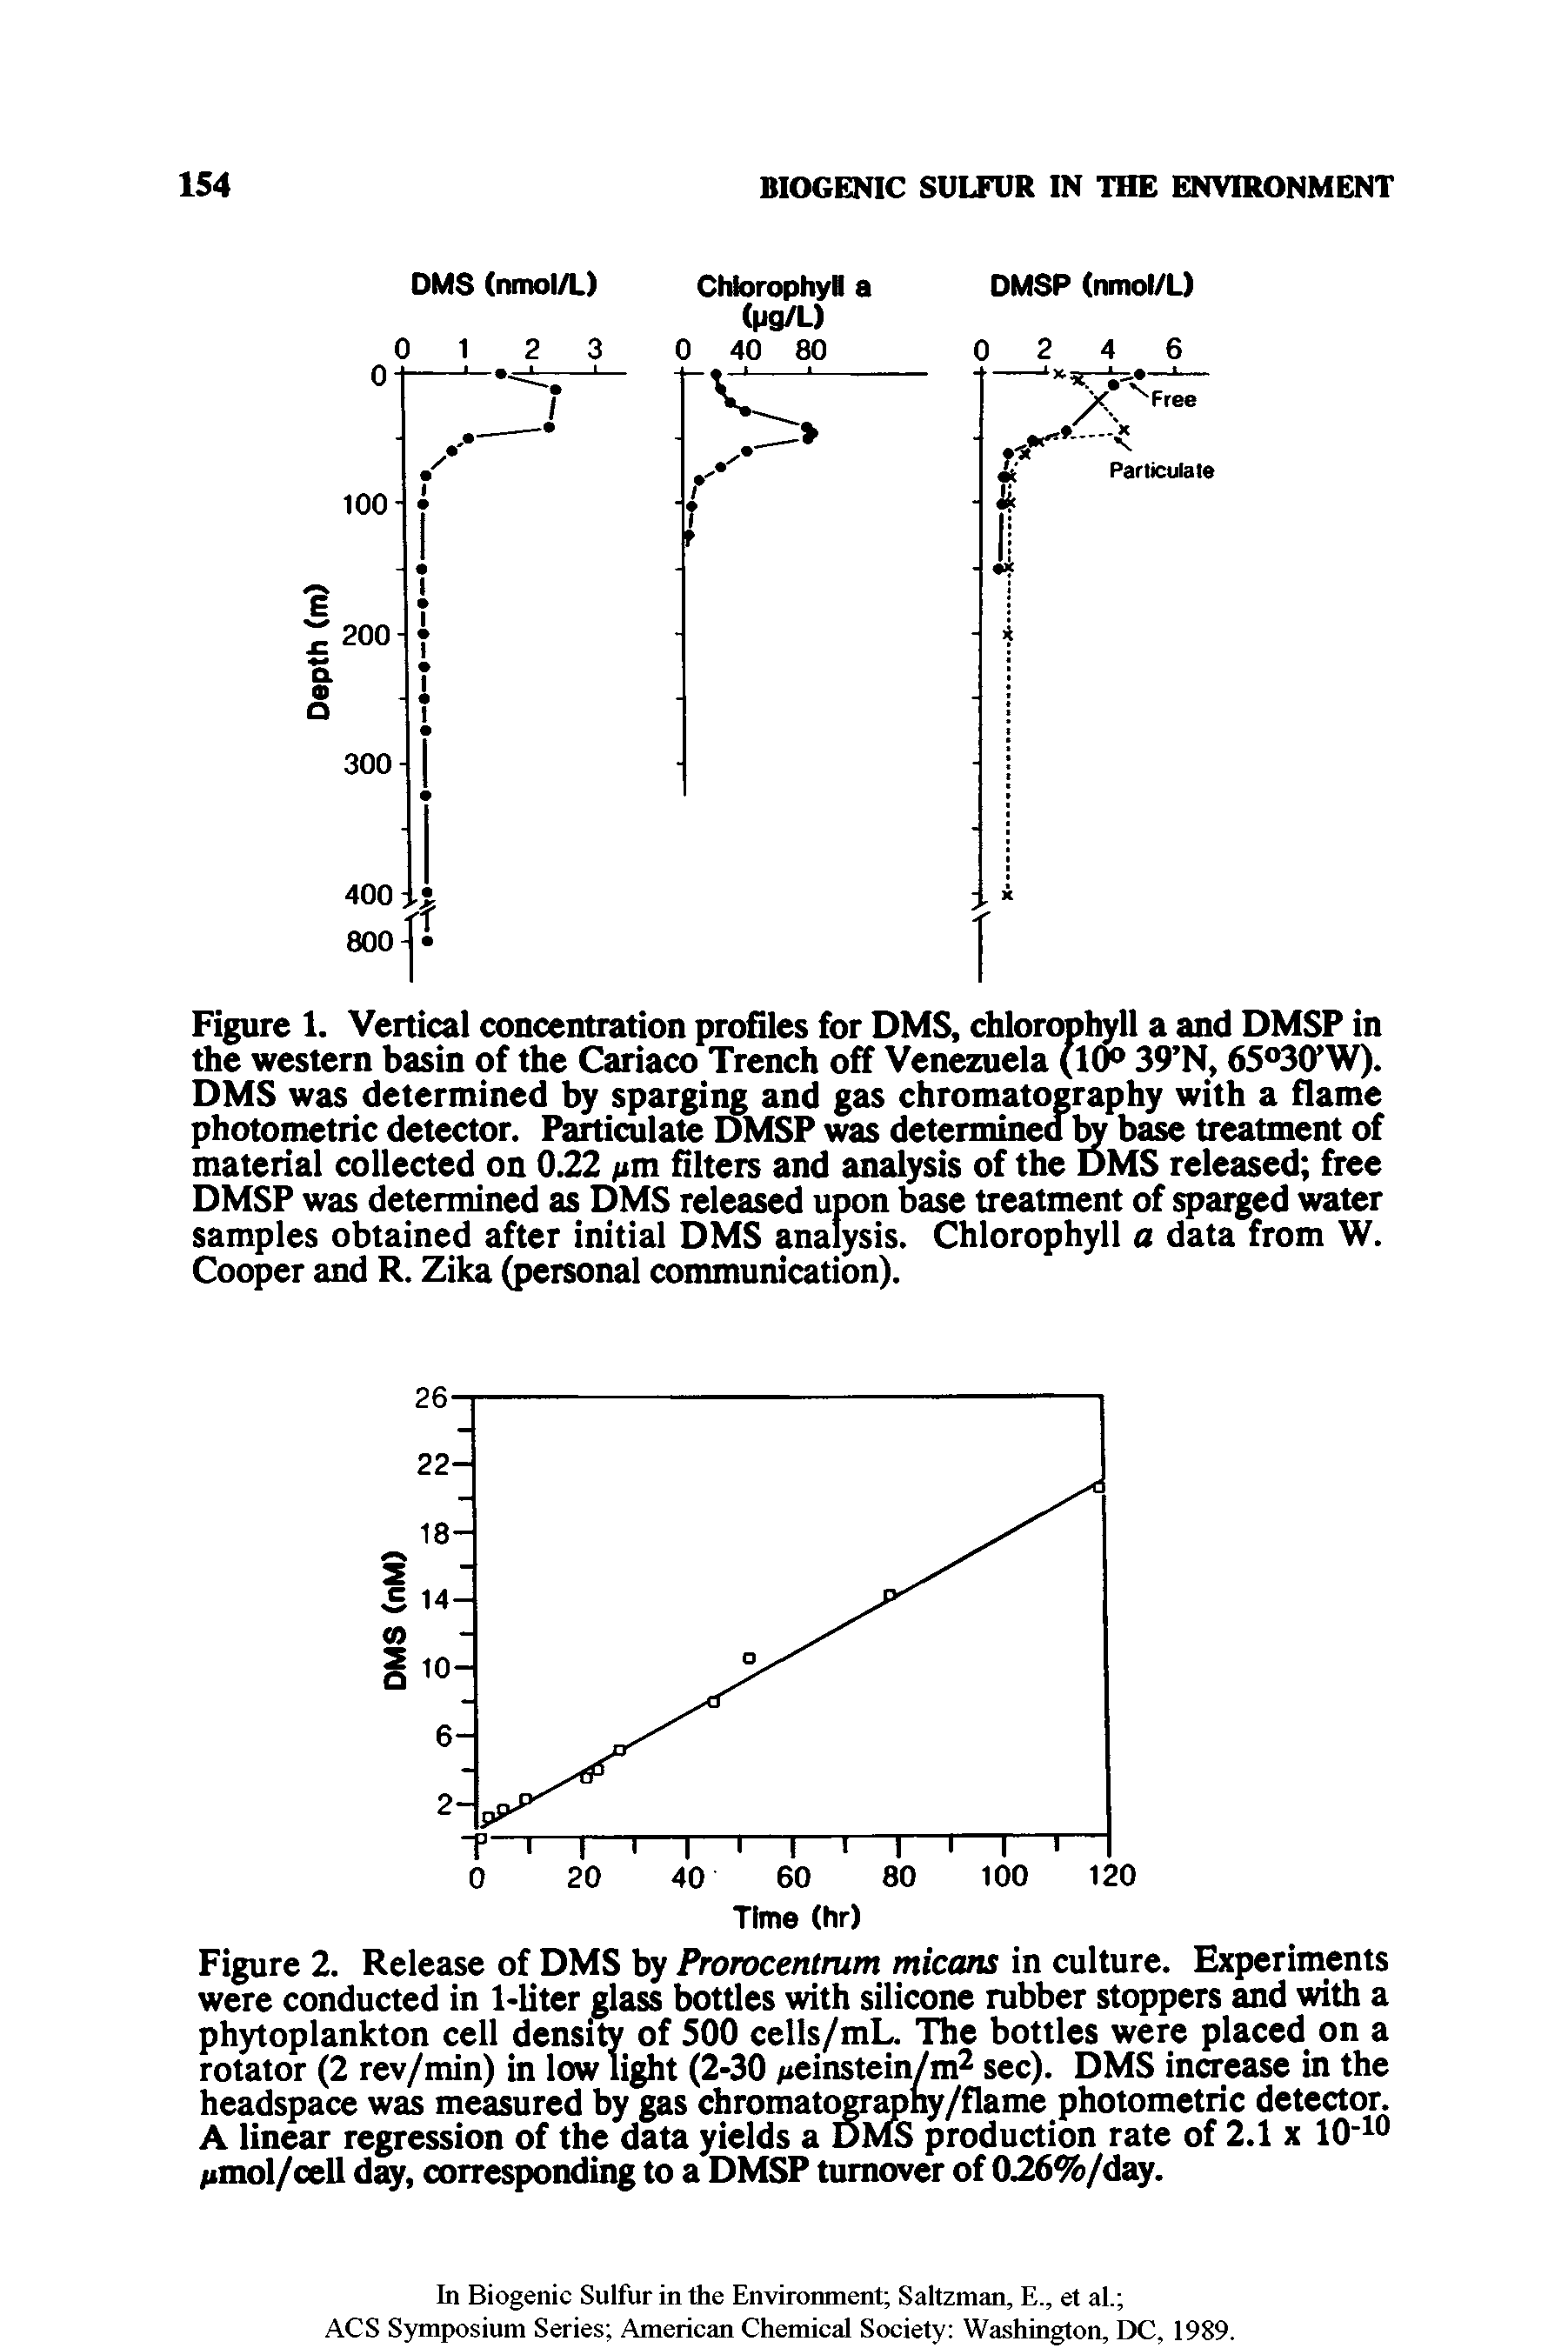 Figure 1. Vertical concentration profiles for DMS, chlorophyll a and DMSP in the western basin of the Cariaco Trench off Venezuela (10° 39 N, 65°30 W). DMS was determined by sparging and gas chromatography with a flame photometric detector. Particulate DMSP was determined bv base treatment of material collected on 0.22 pm filters and analysis of the DMS released free DMSP was determined as DMS released upon base treatment of sparged water samples obtained after initial DMS analysis. Chlorophyll a data from W. Cooper and R. Zika (personal communication).